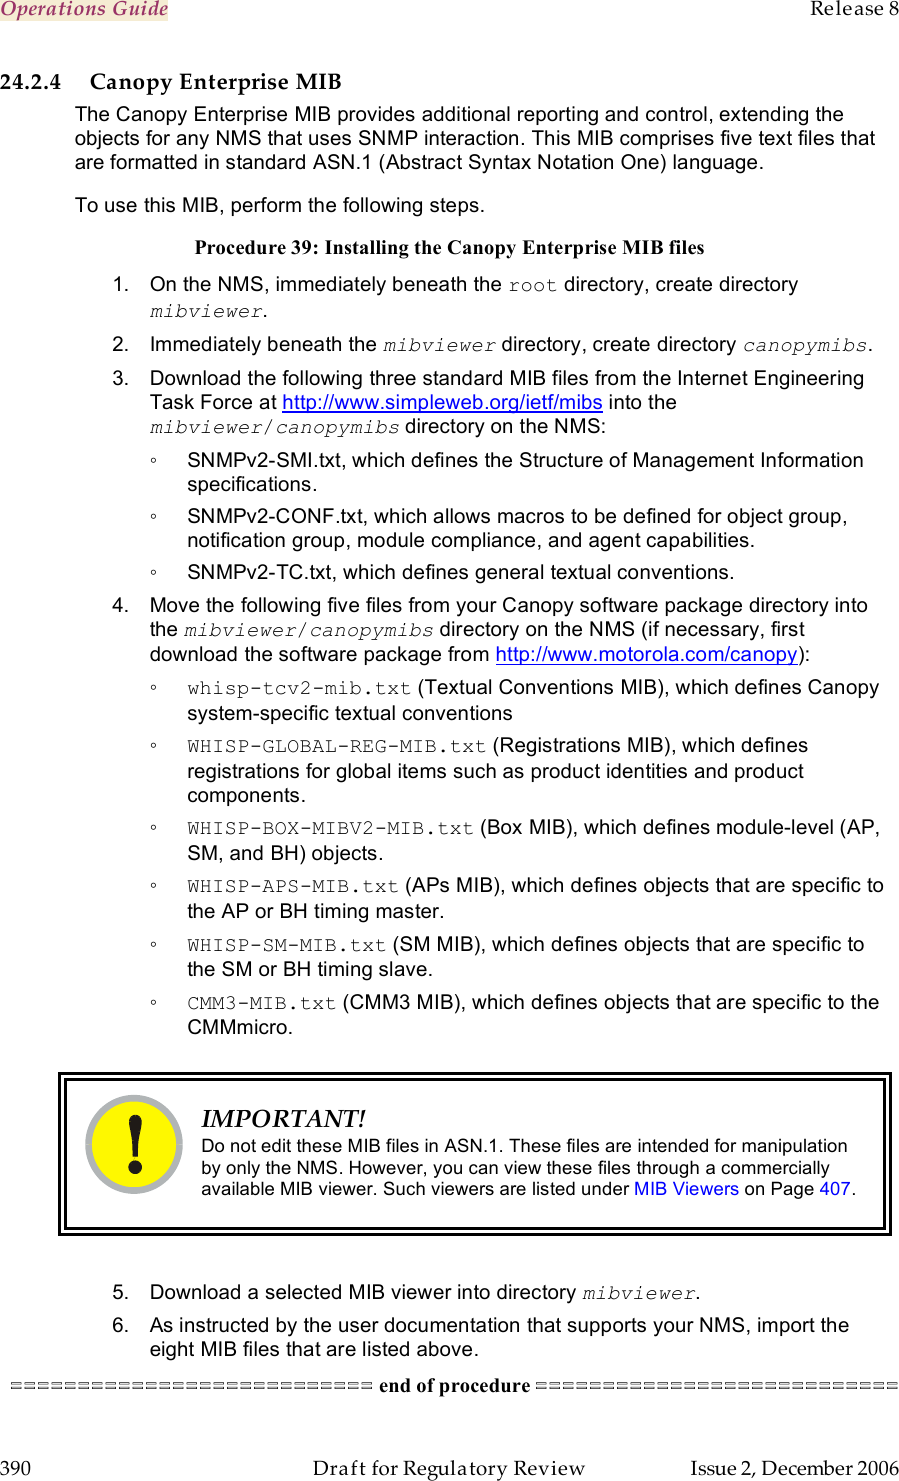 Operations Guide    Release 8   390  Draft for Regulatory Review  Issue 2, December 2006 24.2.4 Canopy Enterprise MIB The Canopy Enterprise MIB provides additional reporting and control, extending the objects for any NMS that uses SNMP interaction. This MIB comprises five text files that are formatted in standard ASN.1 (Abstract Syntax Notation One) language. To use this MIB, perform the following steps. Procedure 39: Installing the Canopy Enterprise MIB files 1.  On the NMS, immediately beneath the root directory, create directory mibviewer. 2.  Immediately beneath the mibviewer directory, create directory canopymibs. 3.  Download the following three standard MIB files from the Internet Engineering Task Force at http://www.simpleweb.org/ietf/mibs into the mibviewer/canopymibs directory on the NMS:  ◦  SNMPv2-SMI.txt, which defines the Structure of Management Information specifications. ◦  SNMPv2-CONF.txt, which allows macros to be defined for object group, notification group, module compliance, and agent capabilities. ◦  SNMPv2-TC.txt, which defines general textual conventions. 4.  Move the following five files from your Canopy software package directory into the mibviewer/canopymibs directory on the NMS (if necessary, first download the software package from http://www.motorola.com/canopy): ◦ whisp-tcv2-mib.txt (Textual Conventions MIB), which defines Canopy system-specific textual conventions ◦ WHISP-GLOBAL-REG-MIB.txt (Registrations MIB), which defines registrations for global items such as product identities and product components. ◦ WHISP-BOX-MIBV2-MIB.txt (Box MIB), which defines module-level (AP, SM, and BH) objects. ◦ WHISP-APS-MIB.txt (APs MIB), which defines objects that are specific to the AP or BH timing master. ◦ WHISP-SM-MIB.txt (SM MIB), which defines objects that are specific to the SM or BH timing slave. ◦ CMM3-MIB.txt (CMM3 MIB), which defines objects that are specific to the CMMmicro.   IMPORTANT! Do not edit these MIB files in ASN.1. These files are intended for manipulation by only the NMS. However, you can view these files through a commercially available MIB viewer. Such viewers are listed under MIB Viewers on Page 407.  5.  Download a selected MIB viewer into directory mibviewer. 6.  As instructed by the user documentation that supports your NMS, import the eight MIB files that are listed above. =========================== end of procedure =========================== 